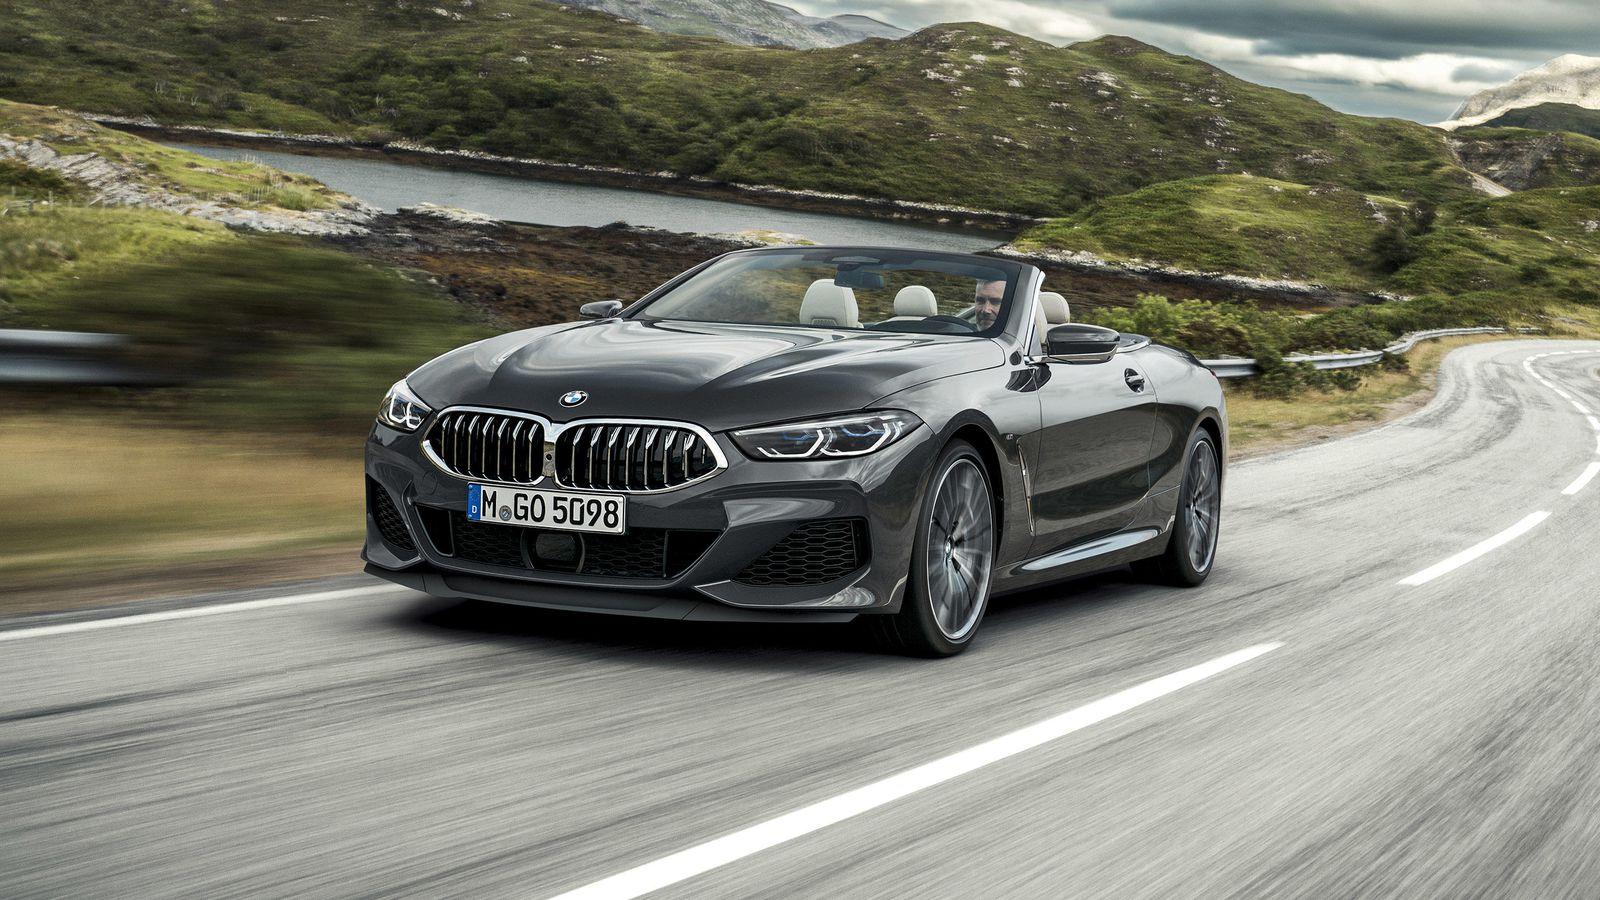 BMW’s Series Convertible is $K sunny day real estate